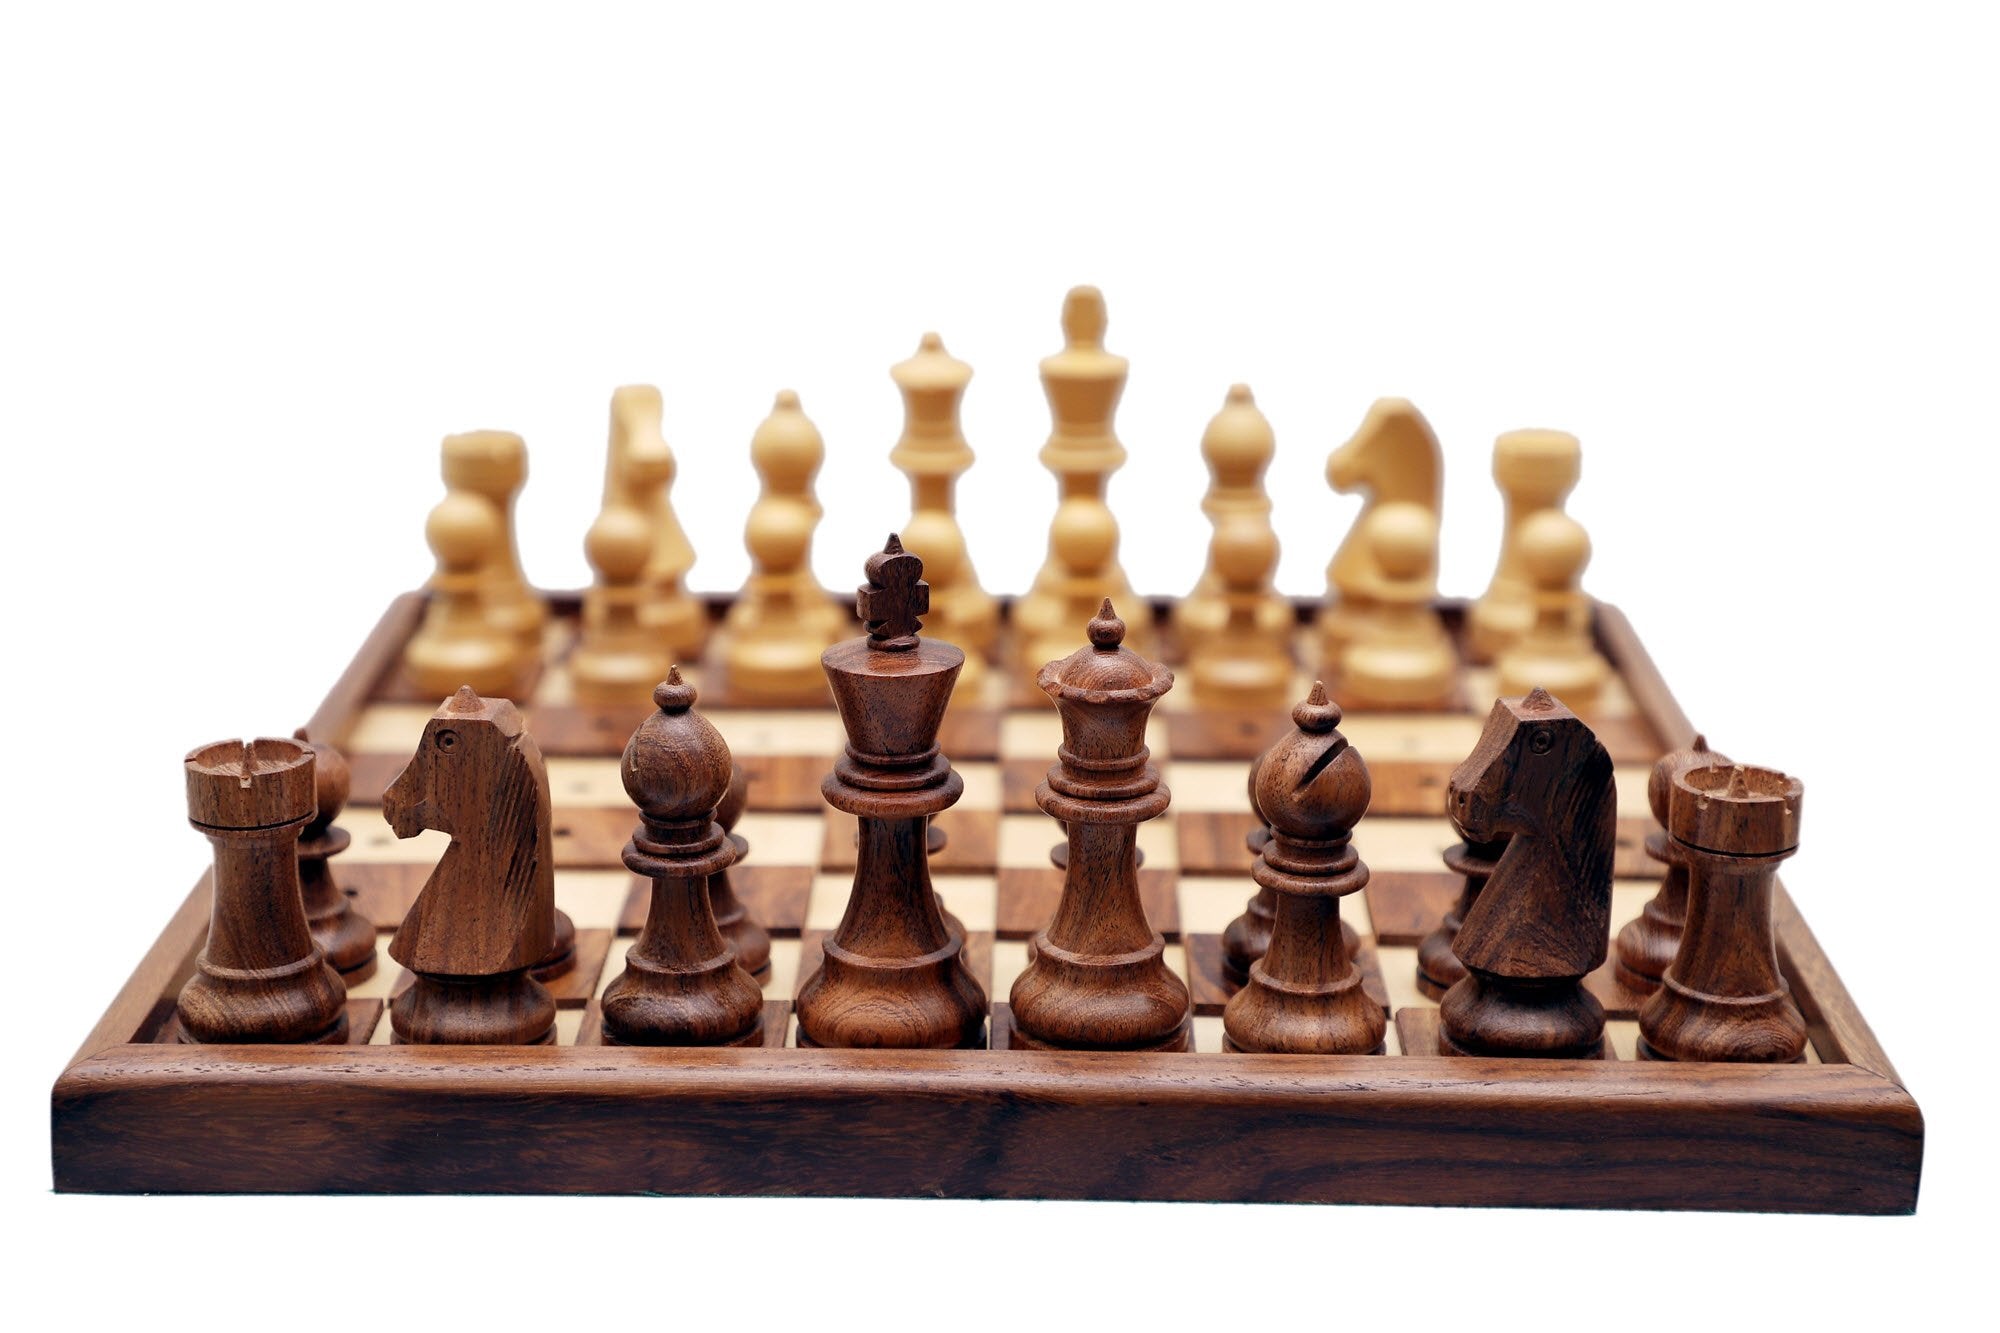 SINGLE REPLACEMENT PIECES: Solid Wooden Chess Set for the Blind and Visually Impaired - 3.75" King in Sheeshamwood and Boxwood - Parts - Chess-House